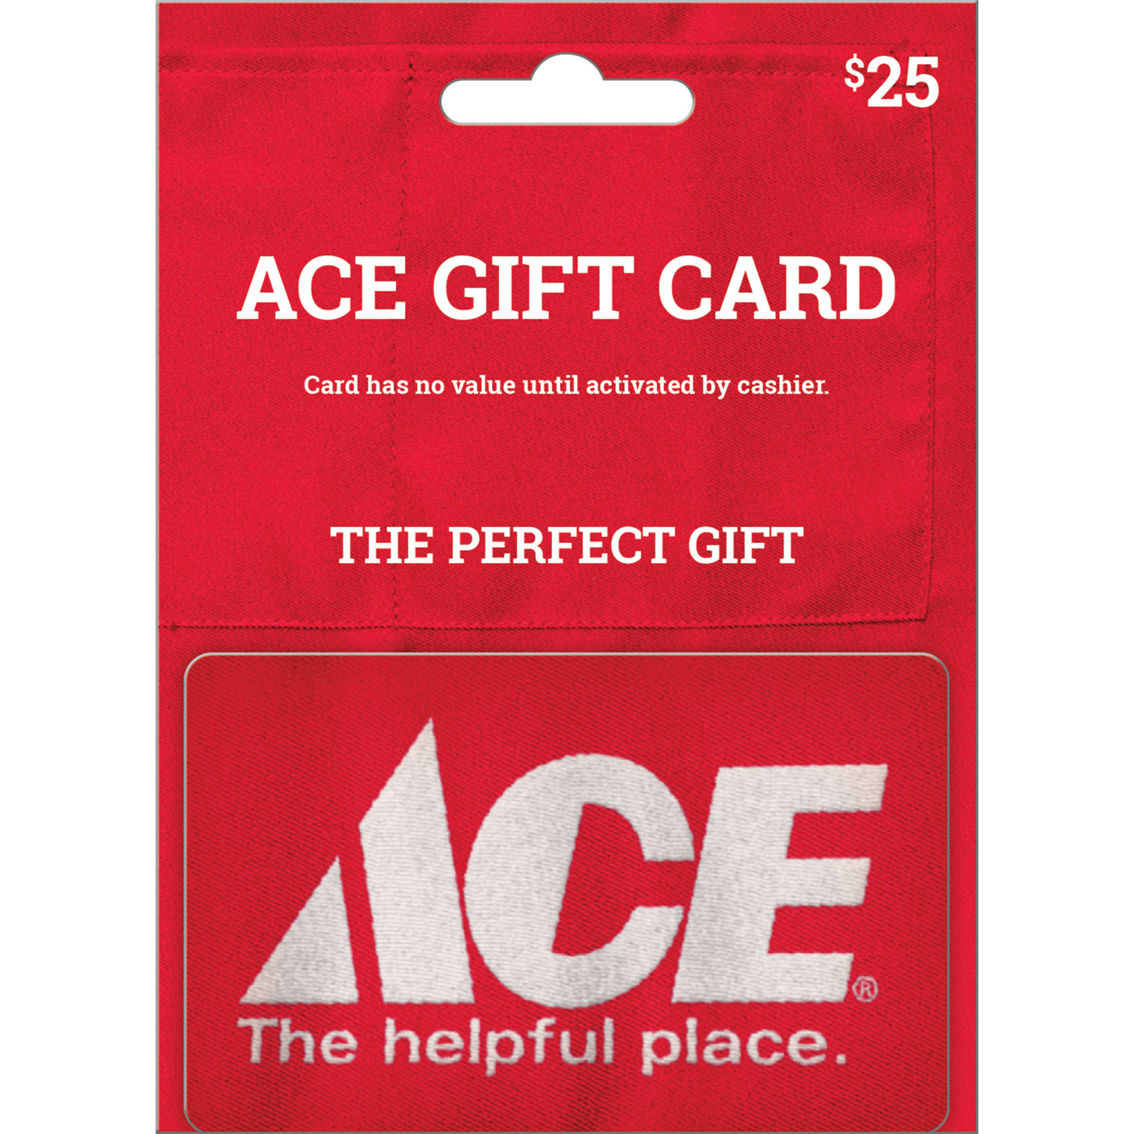 Ace Hardware $25 Gift Card